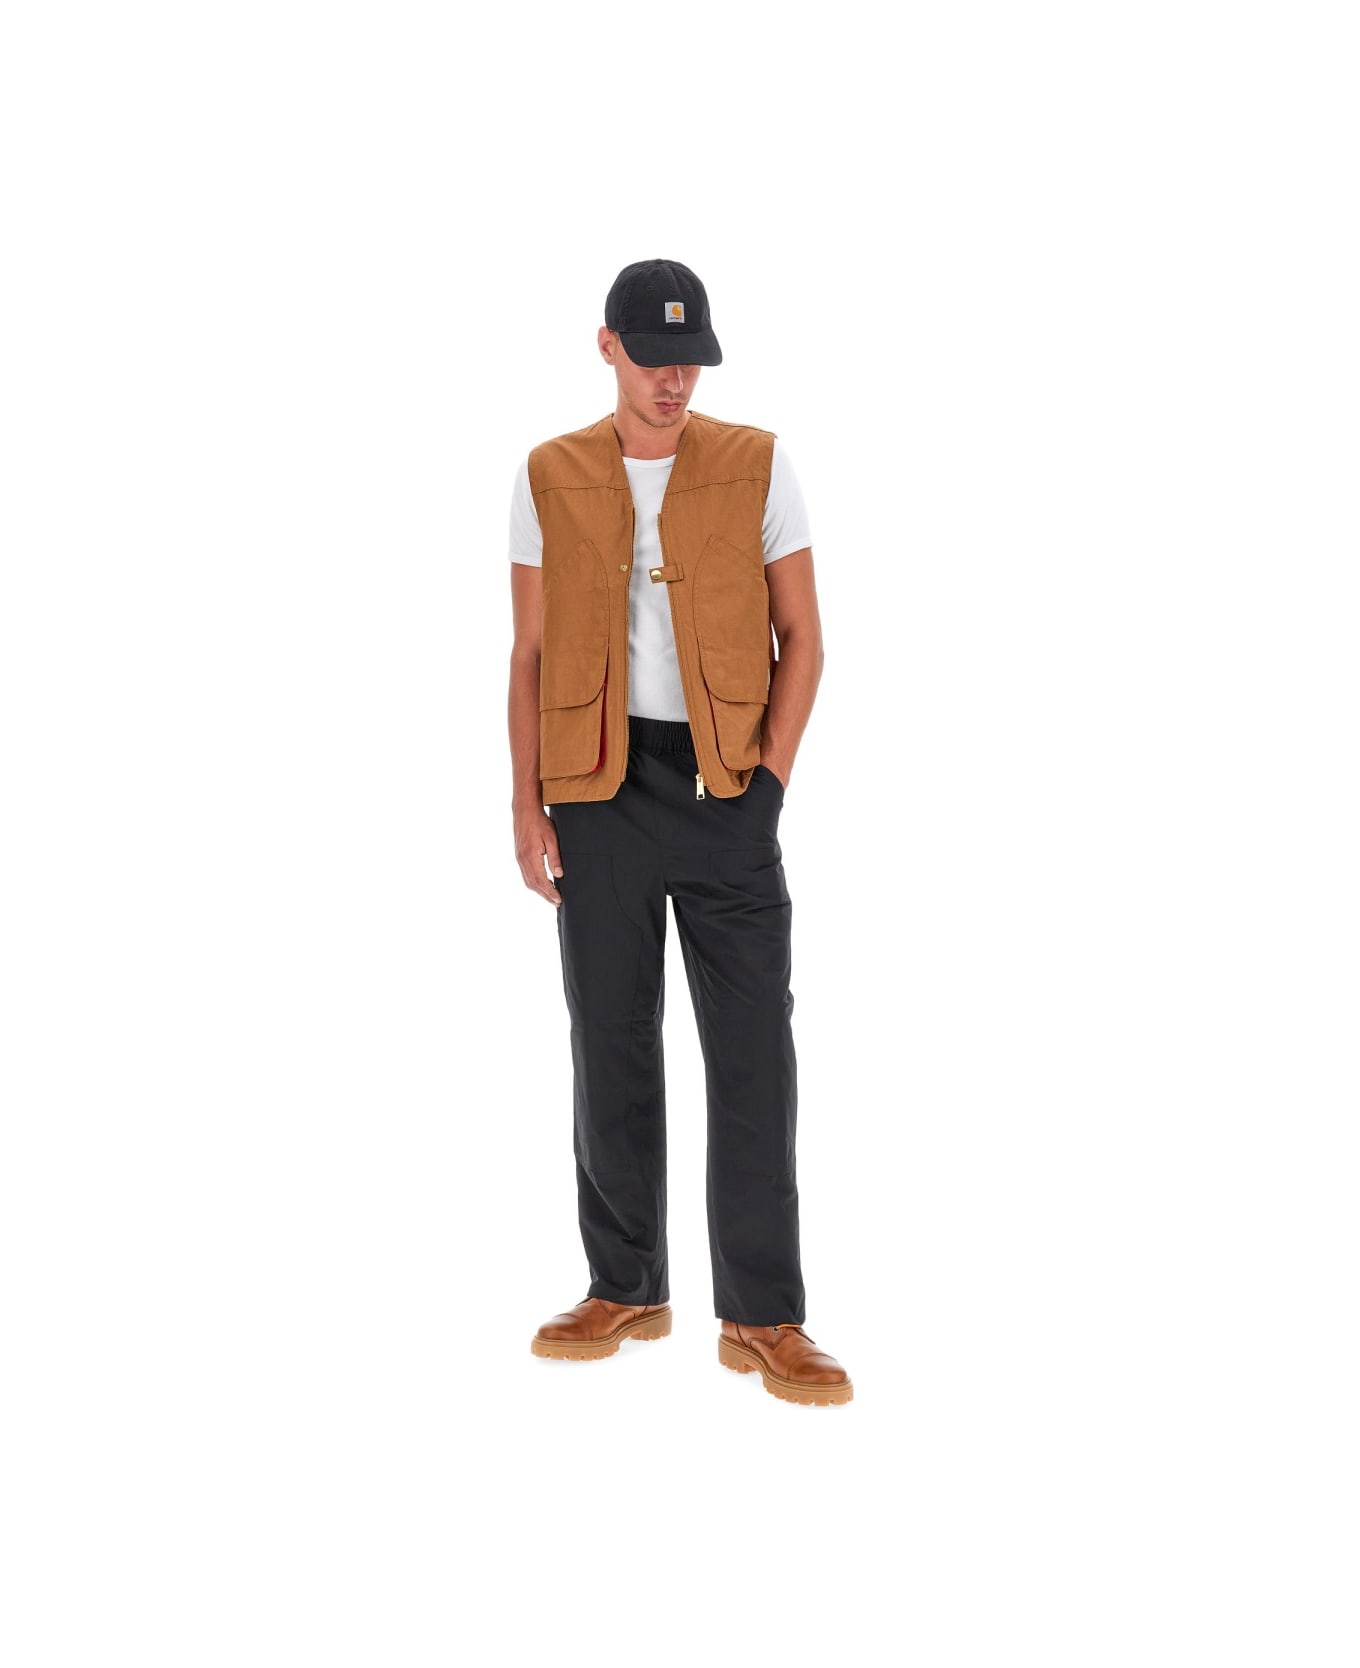 Carhartt Vests With Logo - BROWN